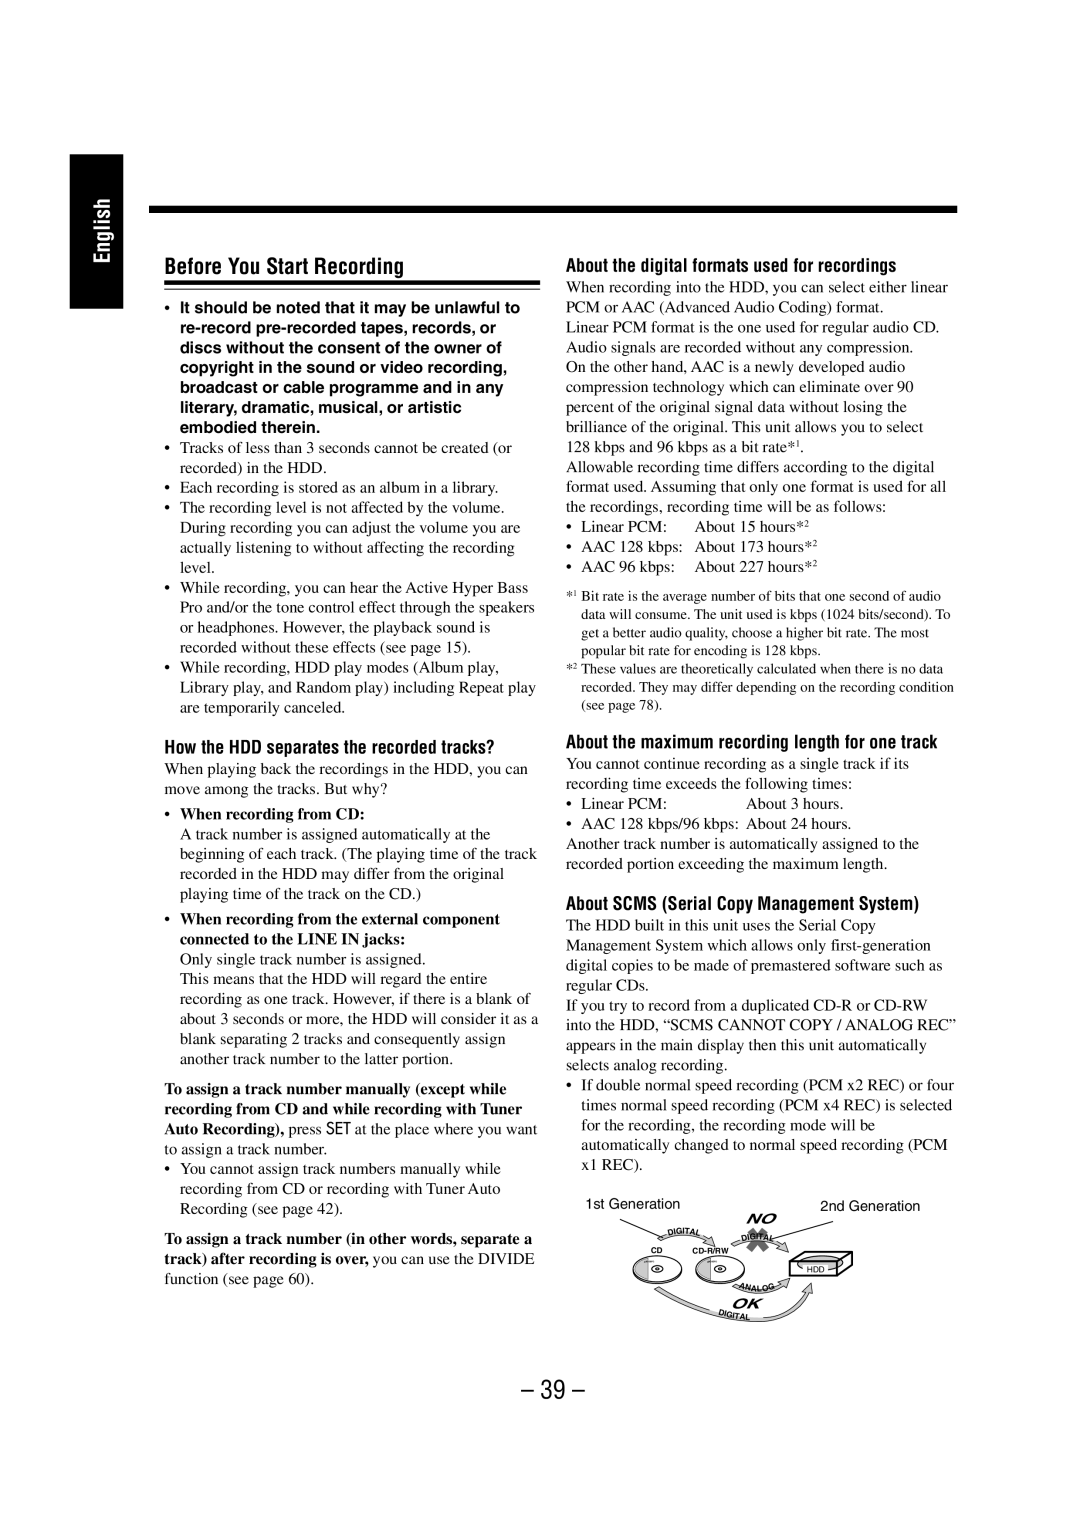 JVC NX-HD10 manual Before You Start Recording, About the digital formats used for recordings 